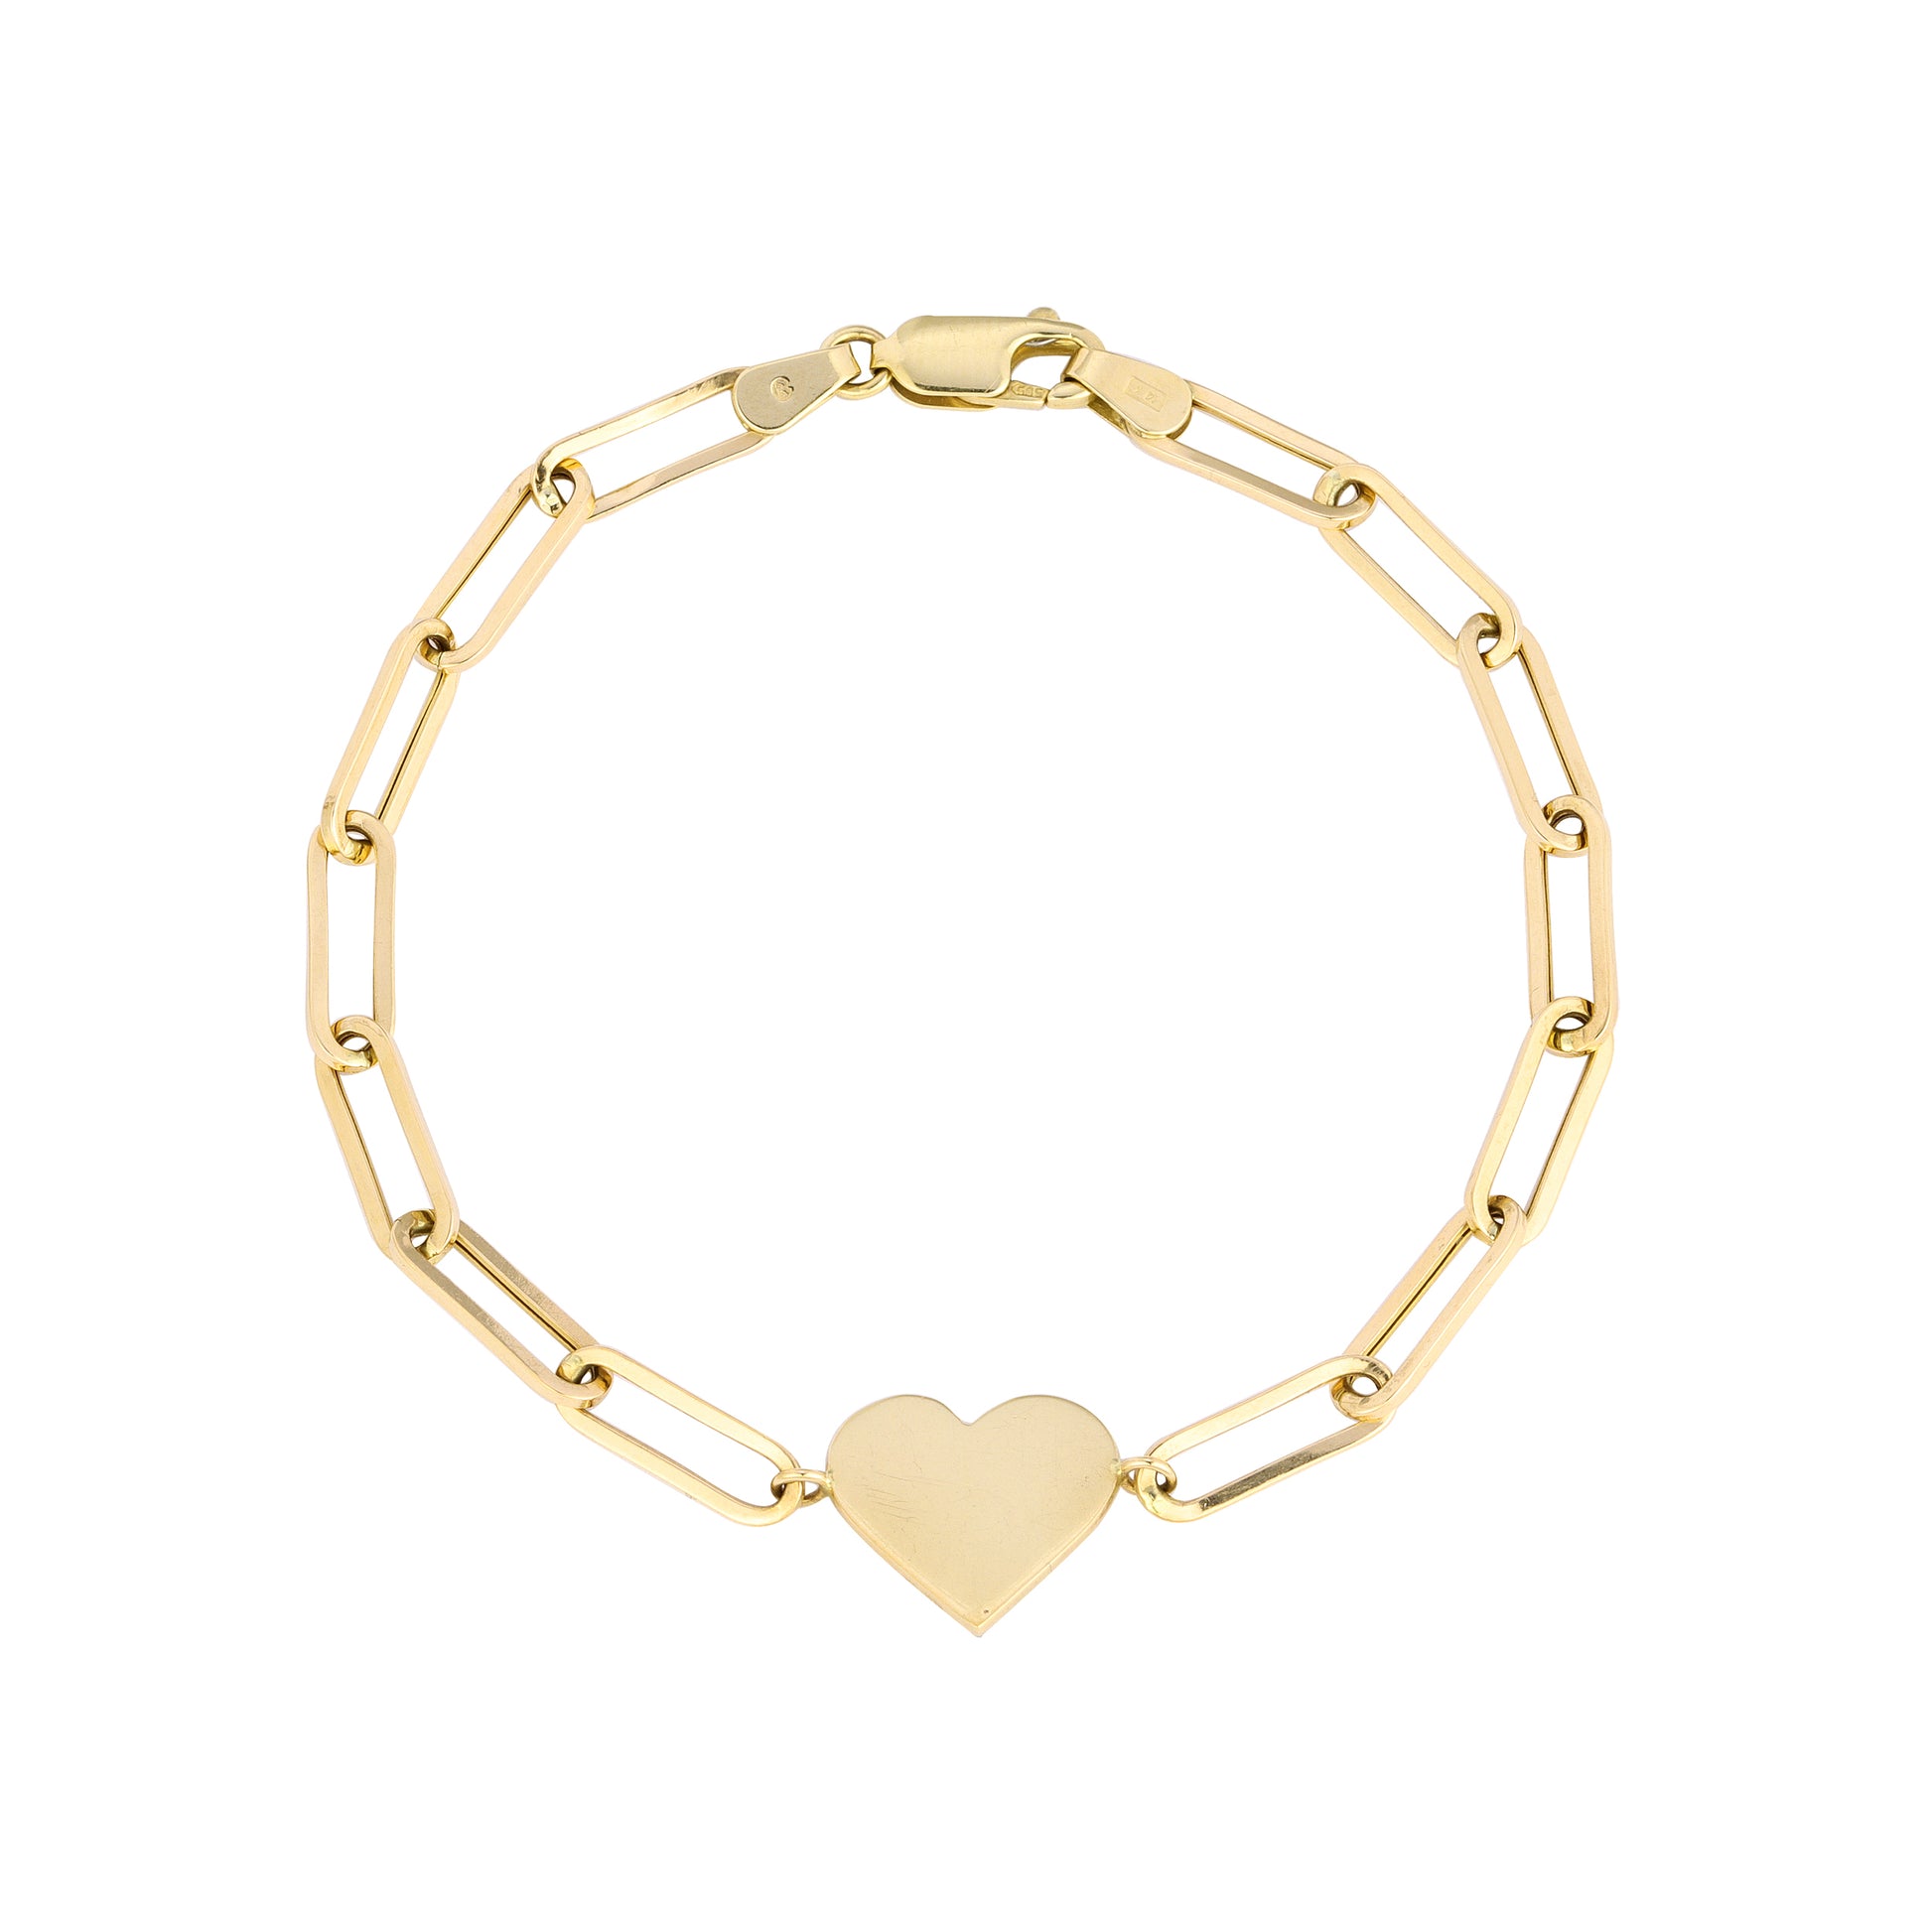 Personalized Heart Charm Bracelet in 14kt Gold - 1 to 7 Birthstones and  Names | Ross-Simons